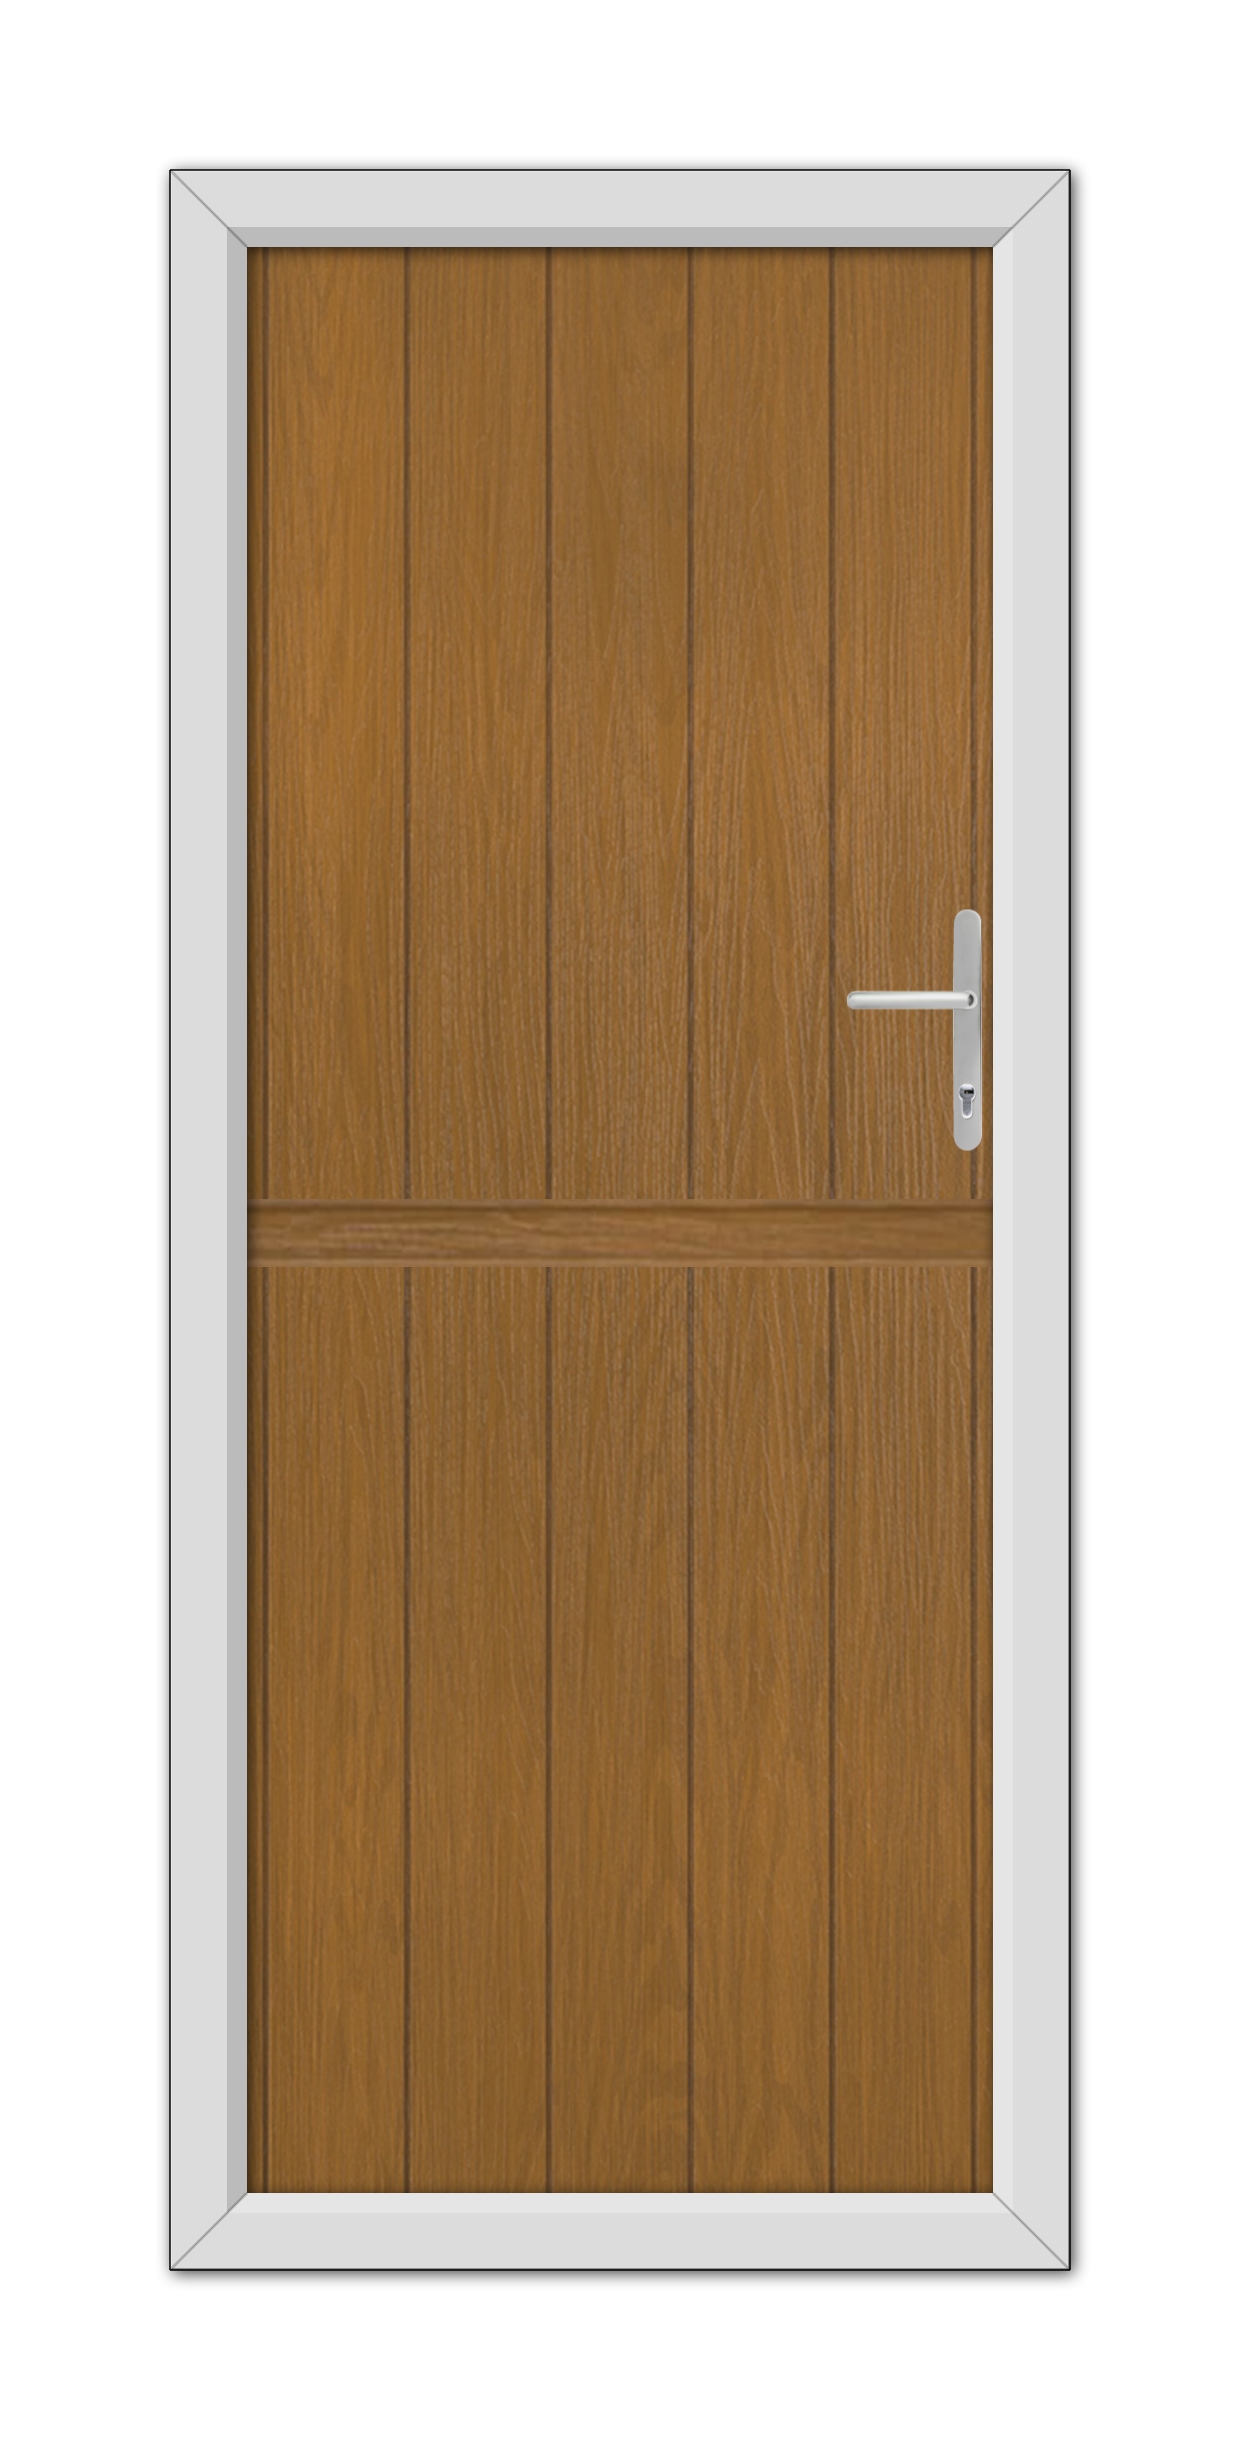 A modern Oak Gloucester Stable Composite Door 48mm Timber Core with a metal handle, framed by a white border, isolated on a white background.